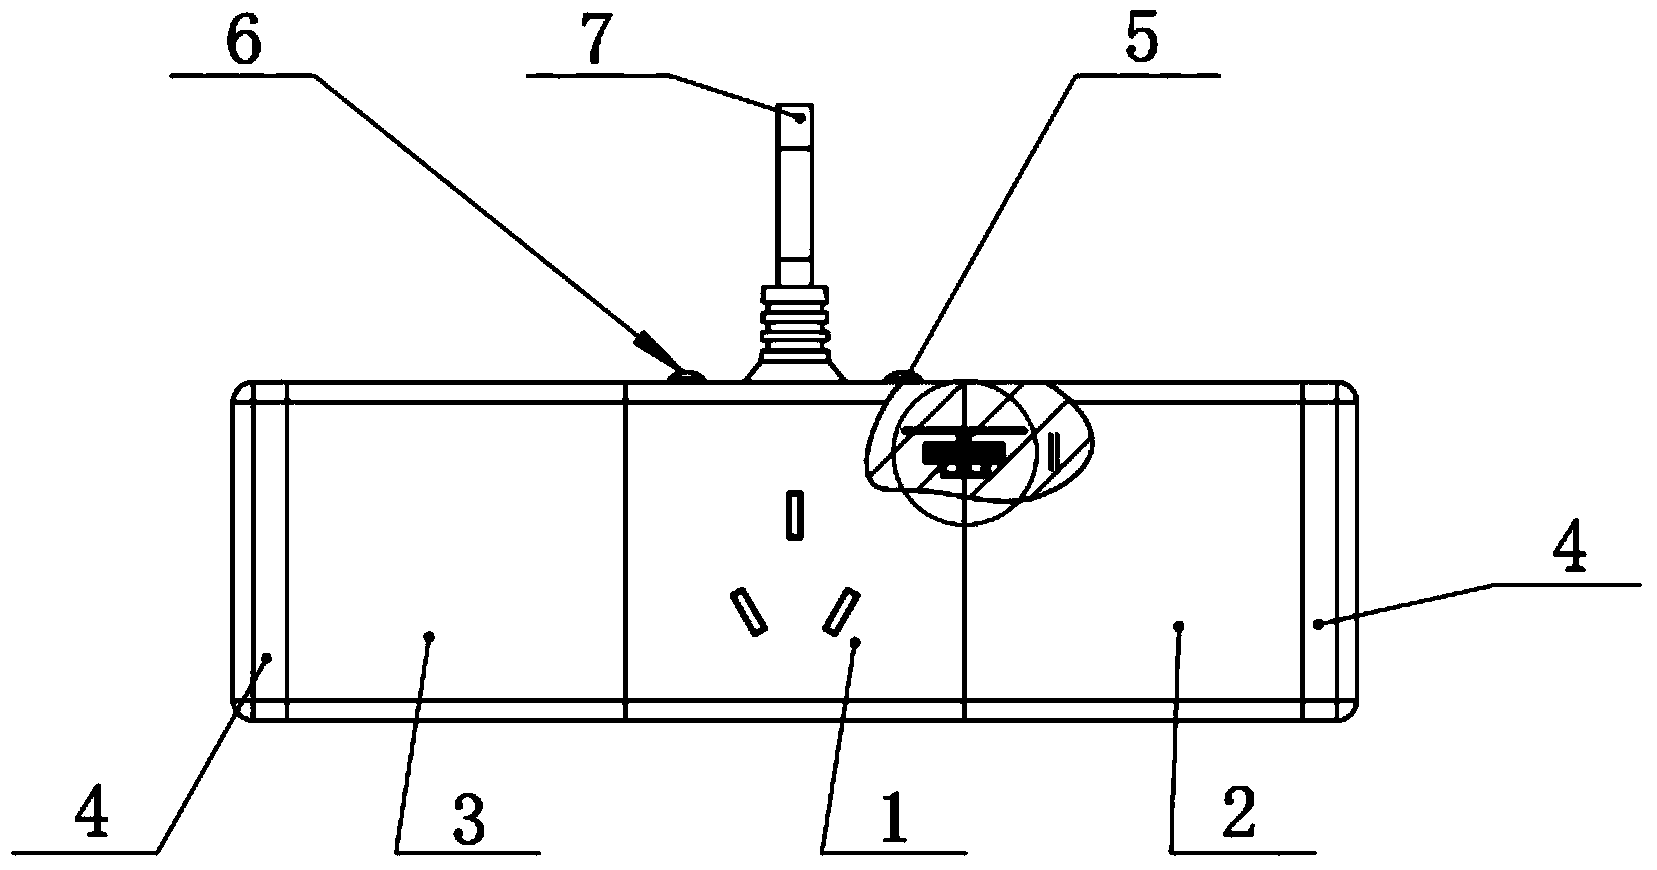 Extended combined module power socket and application